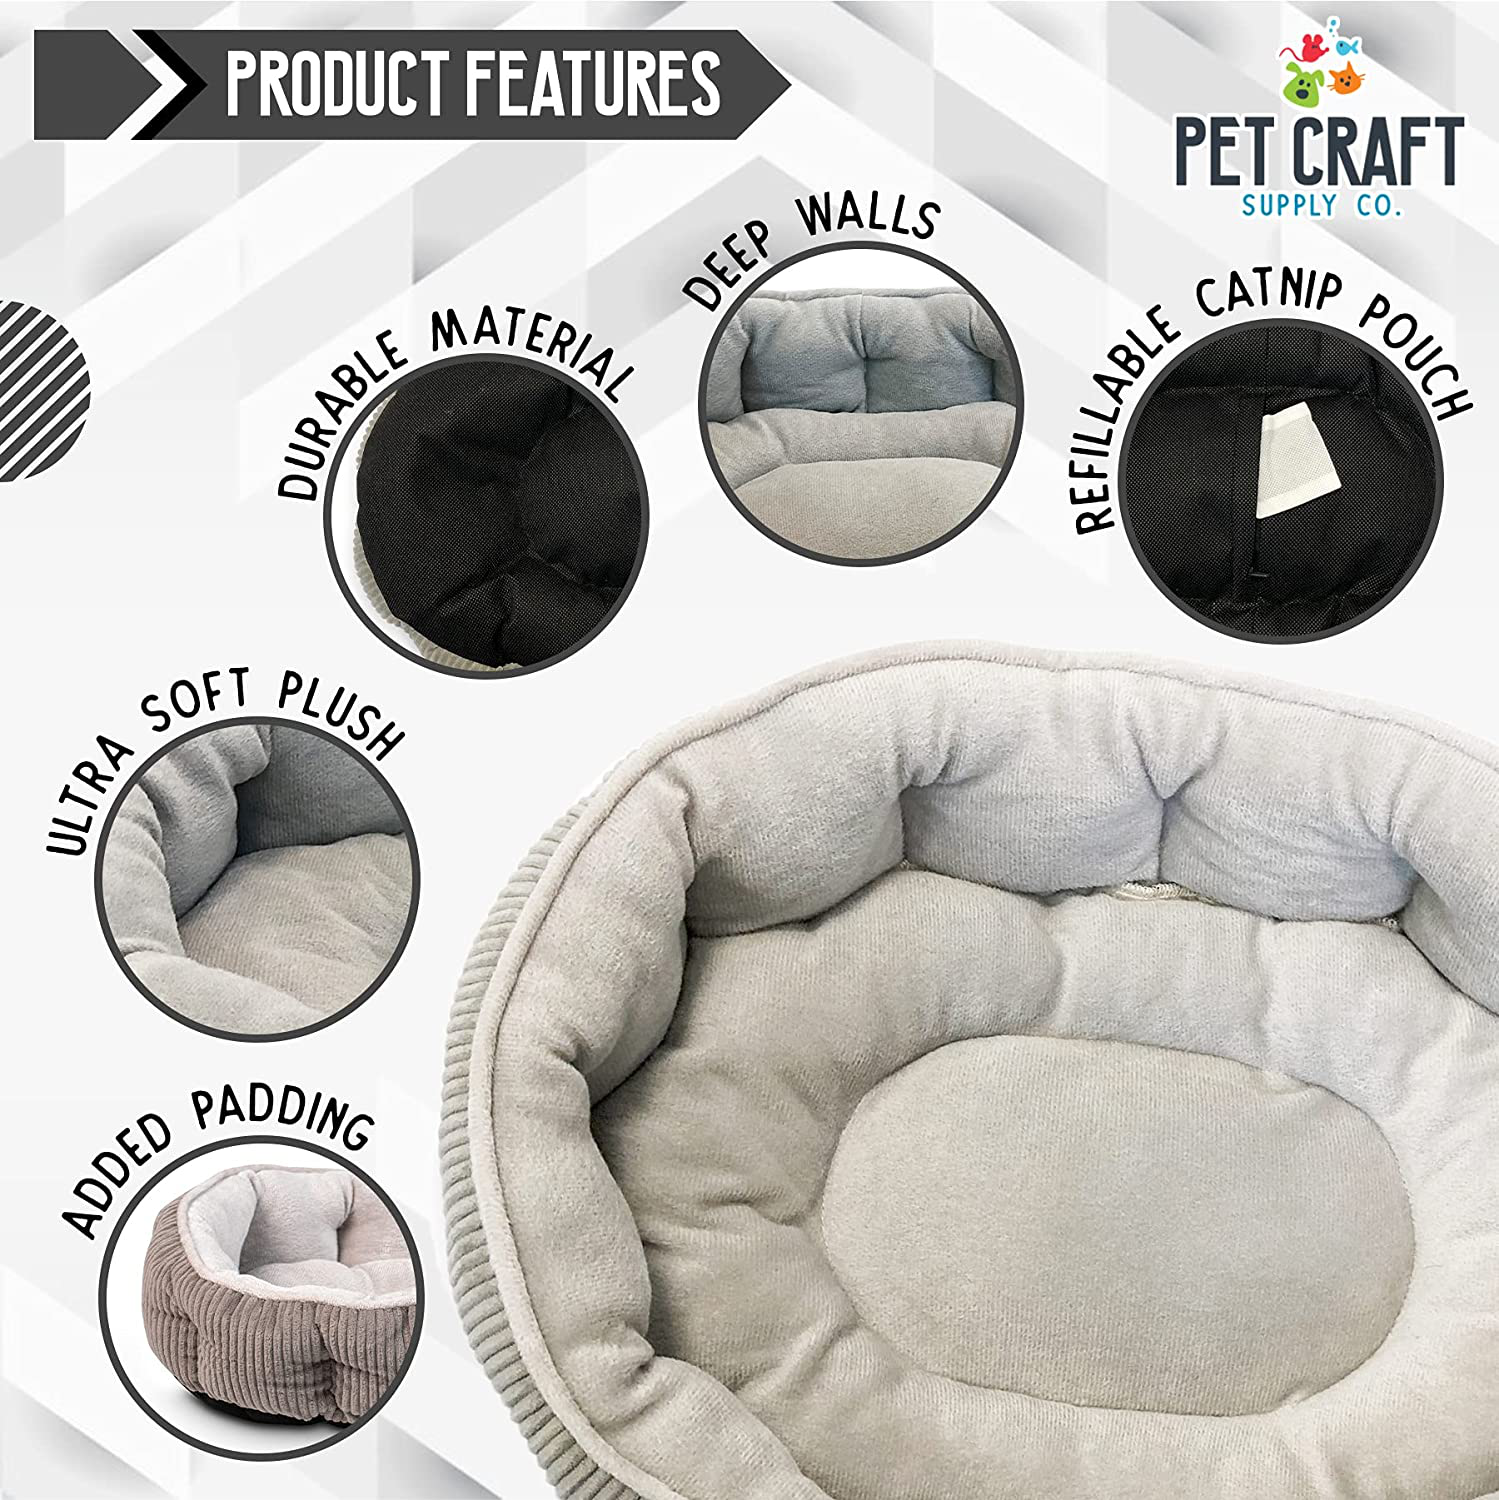 Pet Craft Supply Cat Bed for Indoor Cats - Kitten Bed - Machine Washable - Ultra Soft - Self Warming - Refillable Catnip Pouch Animals & Pet Supplies > Pet Supplies > Dog Supplies > Dog Beds R2PH0   